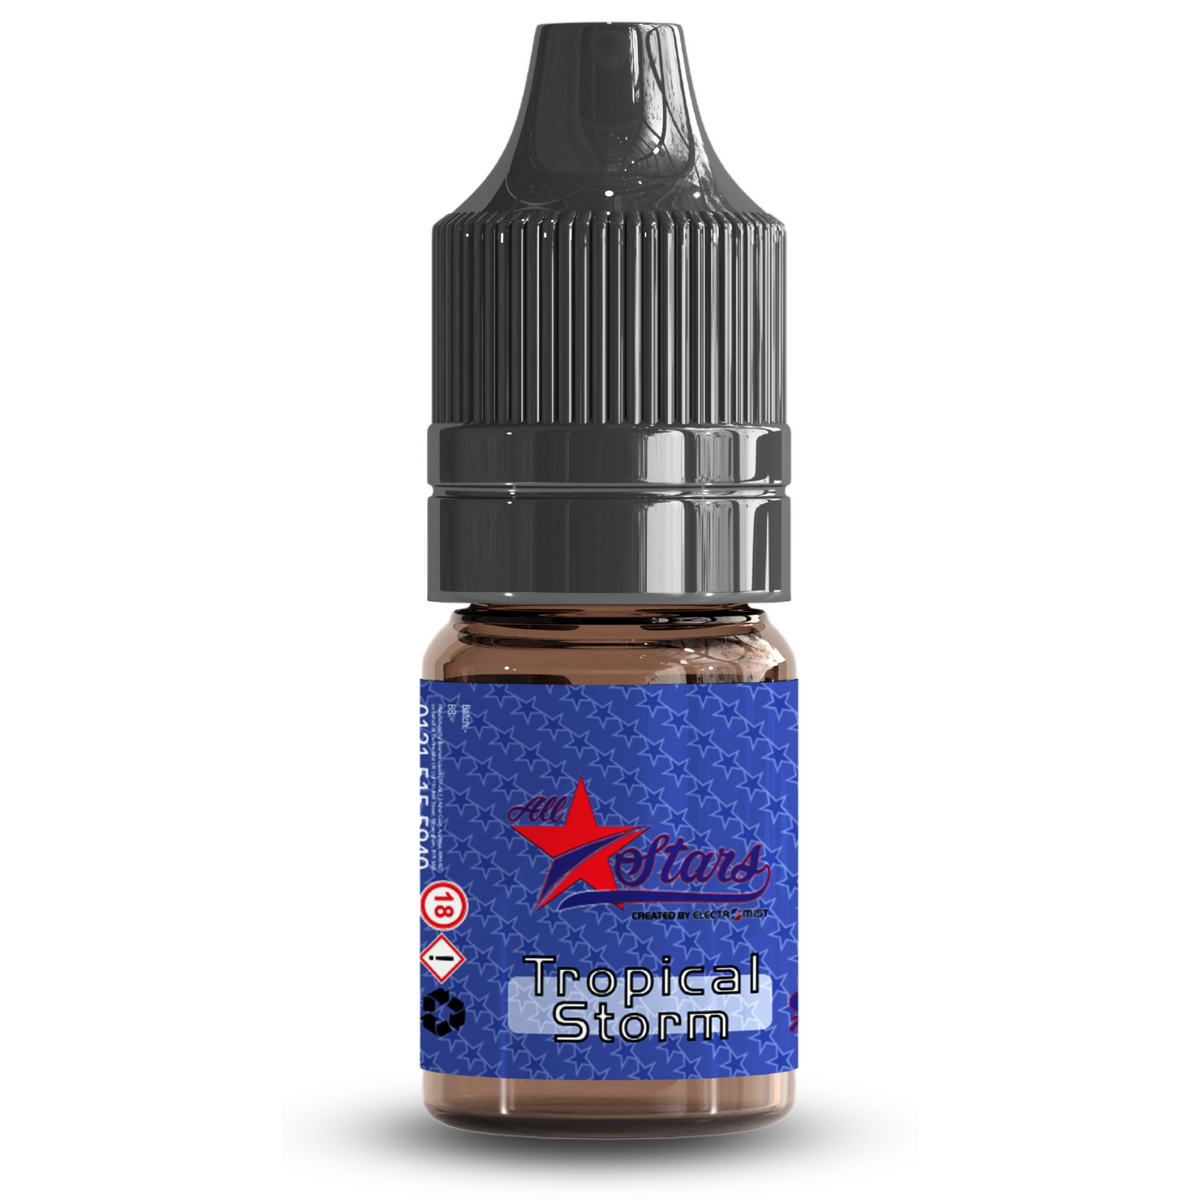 All Stars E-Liquid from the vape brand you can trust, Electromist, . Get your taste buds ready for a flavour sensation, Tropical Storm. Nicotine Content: 6mg/12mg/18mg Products may contain nicotine. For over 18s Only ejuice, vape pen, eliquid, e cigarette, 10ml, vaping, cloud, PG, VG, 60/40, vape liquid, Flavour, TPD